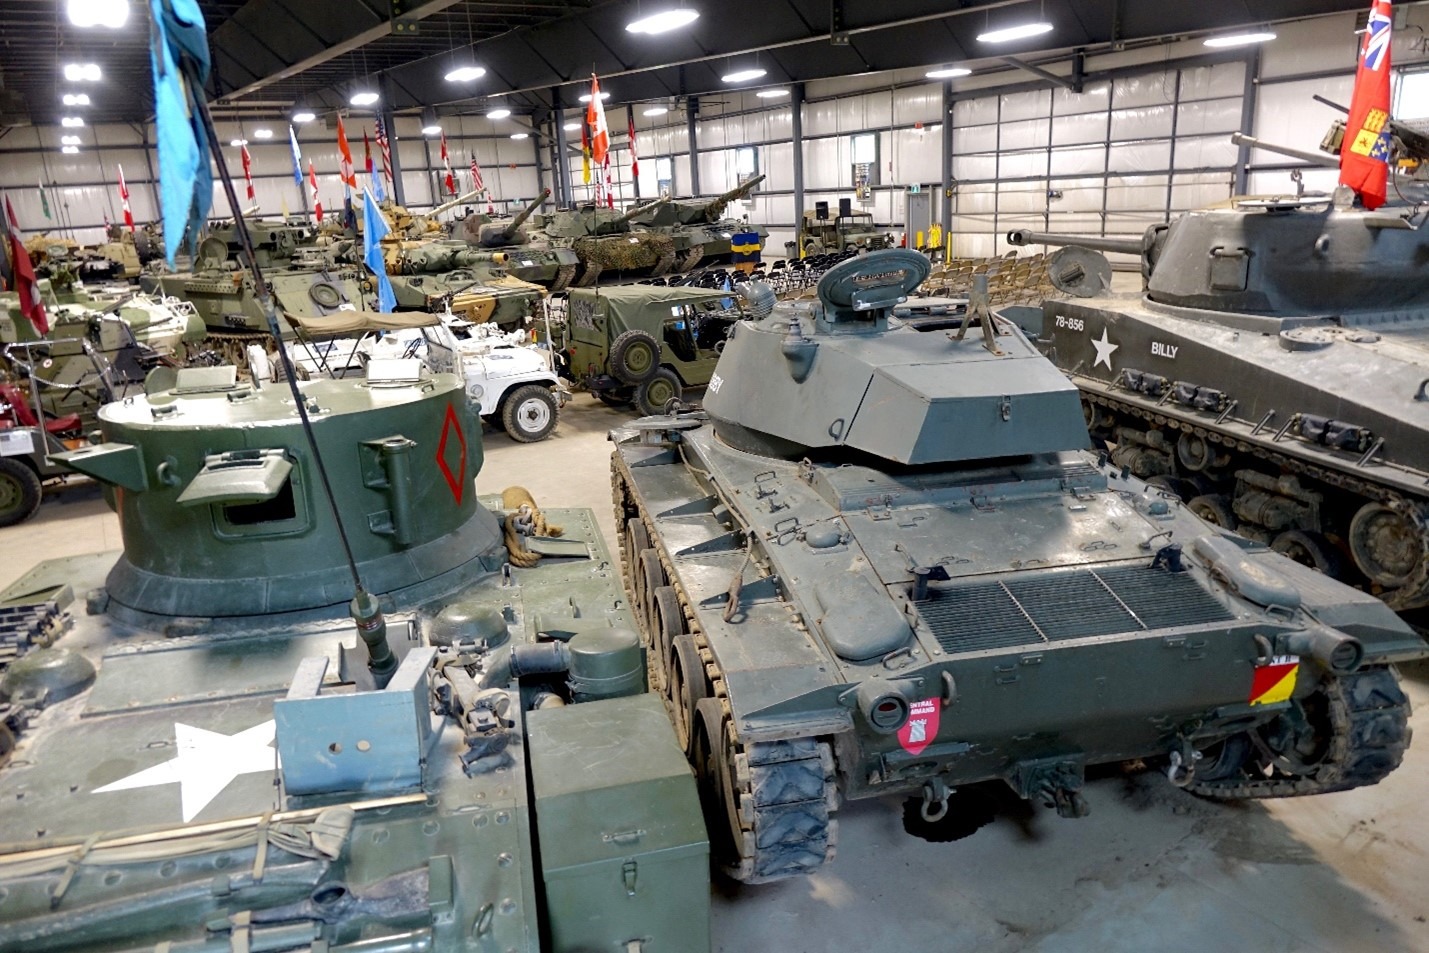 A room full of tanks and old military vehicles.